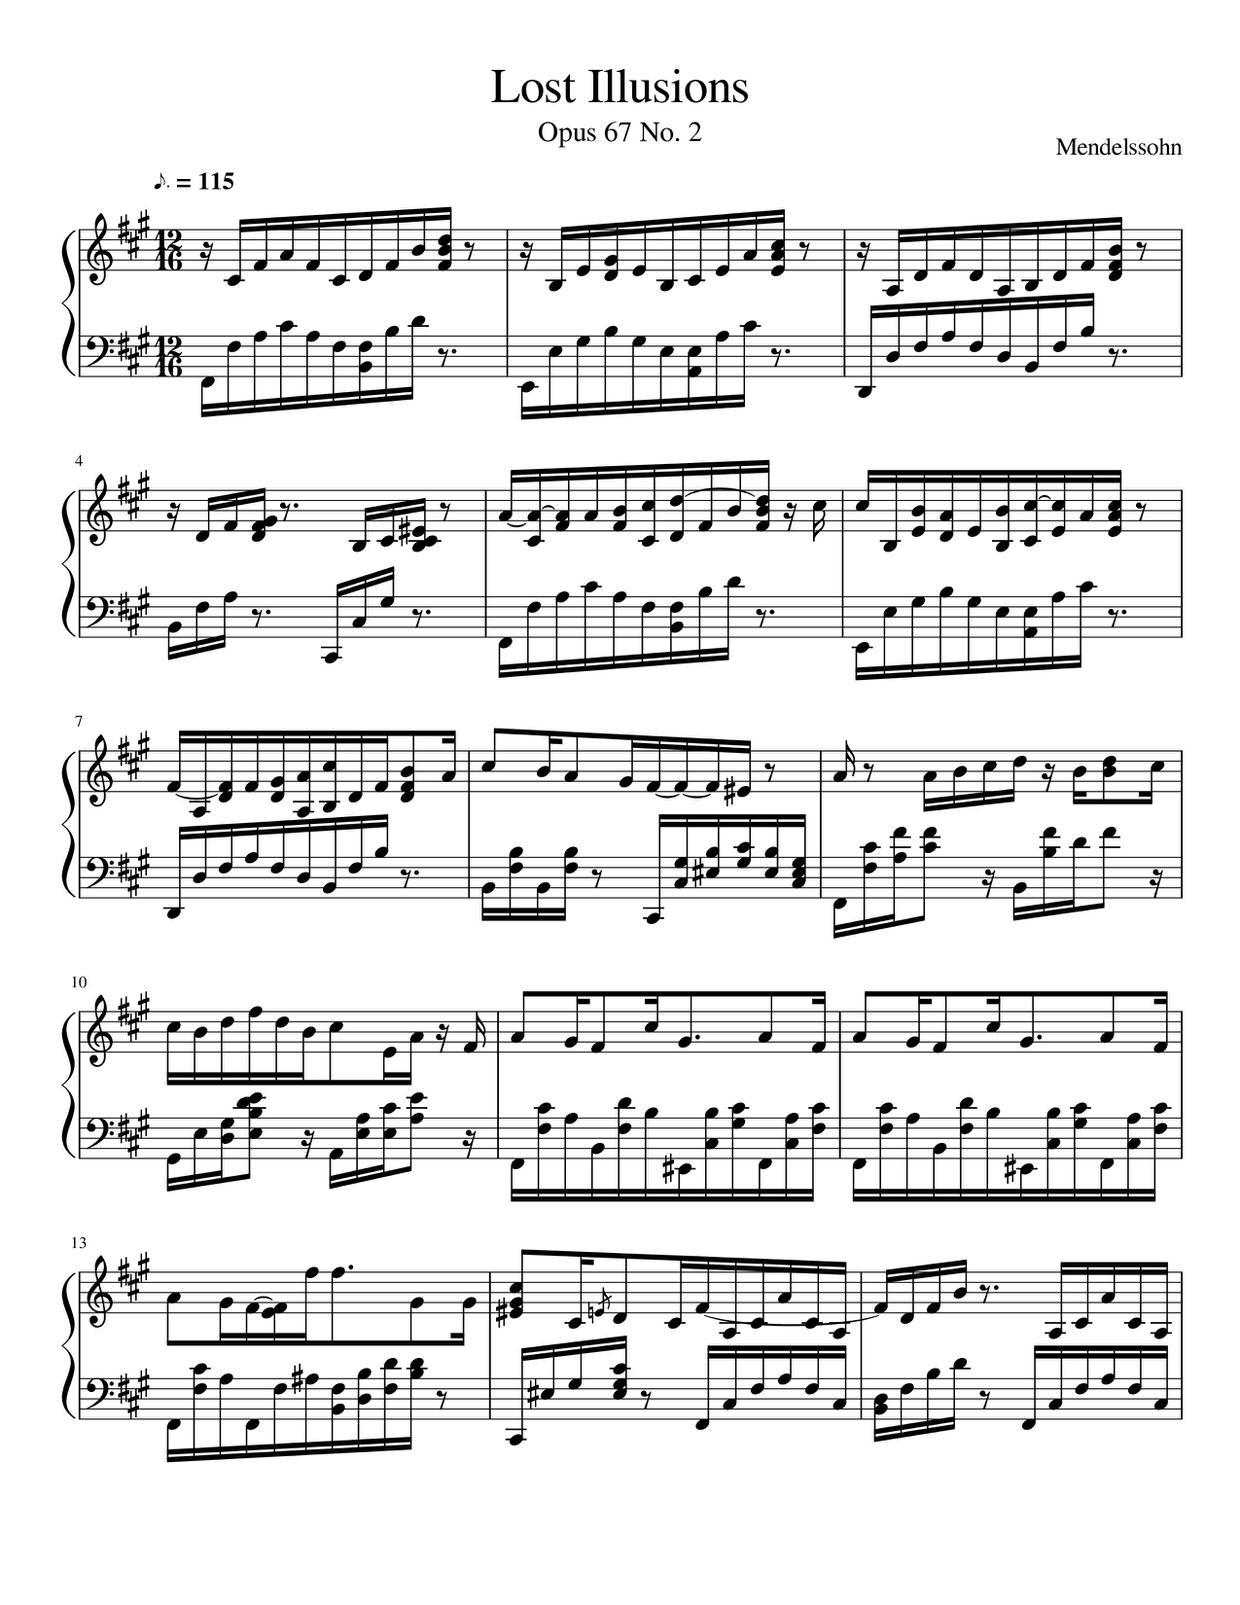 Songs Without Words, Book VI Opus 67: No. 2 in F-Sharp Minorピアノ譜